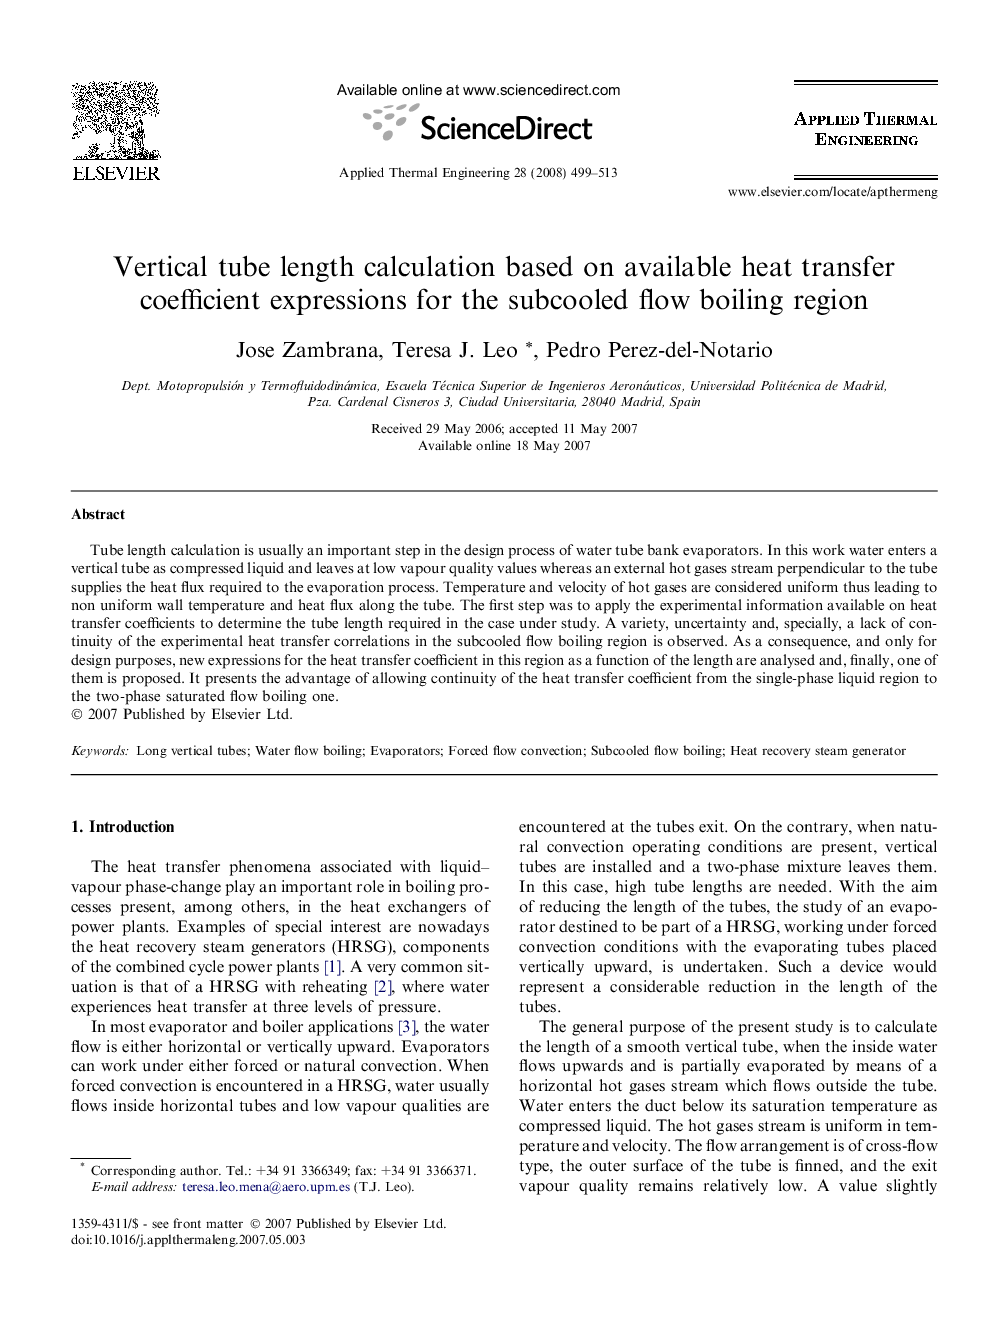 Vertical tube length calculation based on available heat transfer coefficient expressions for the subcooled flow boiling region